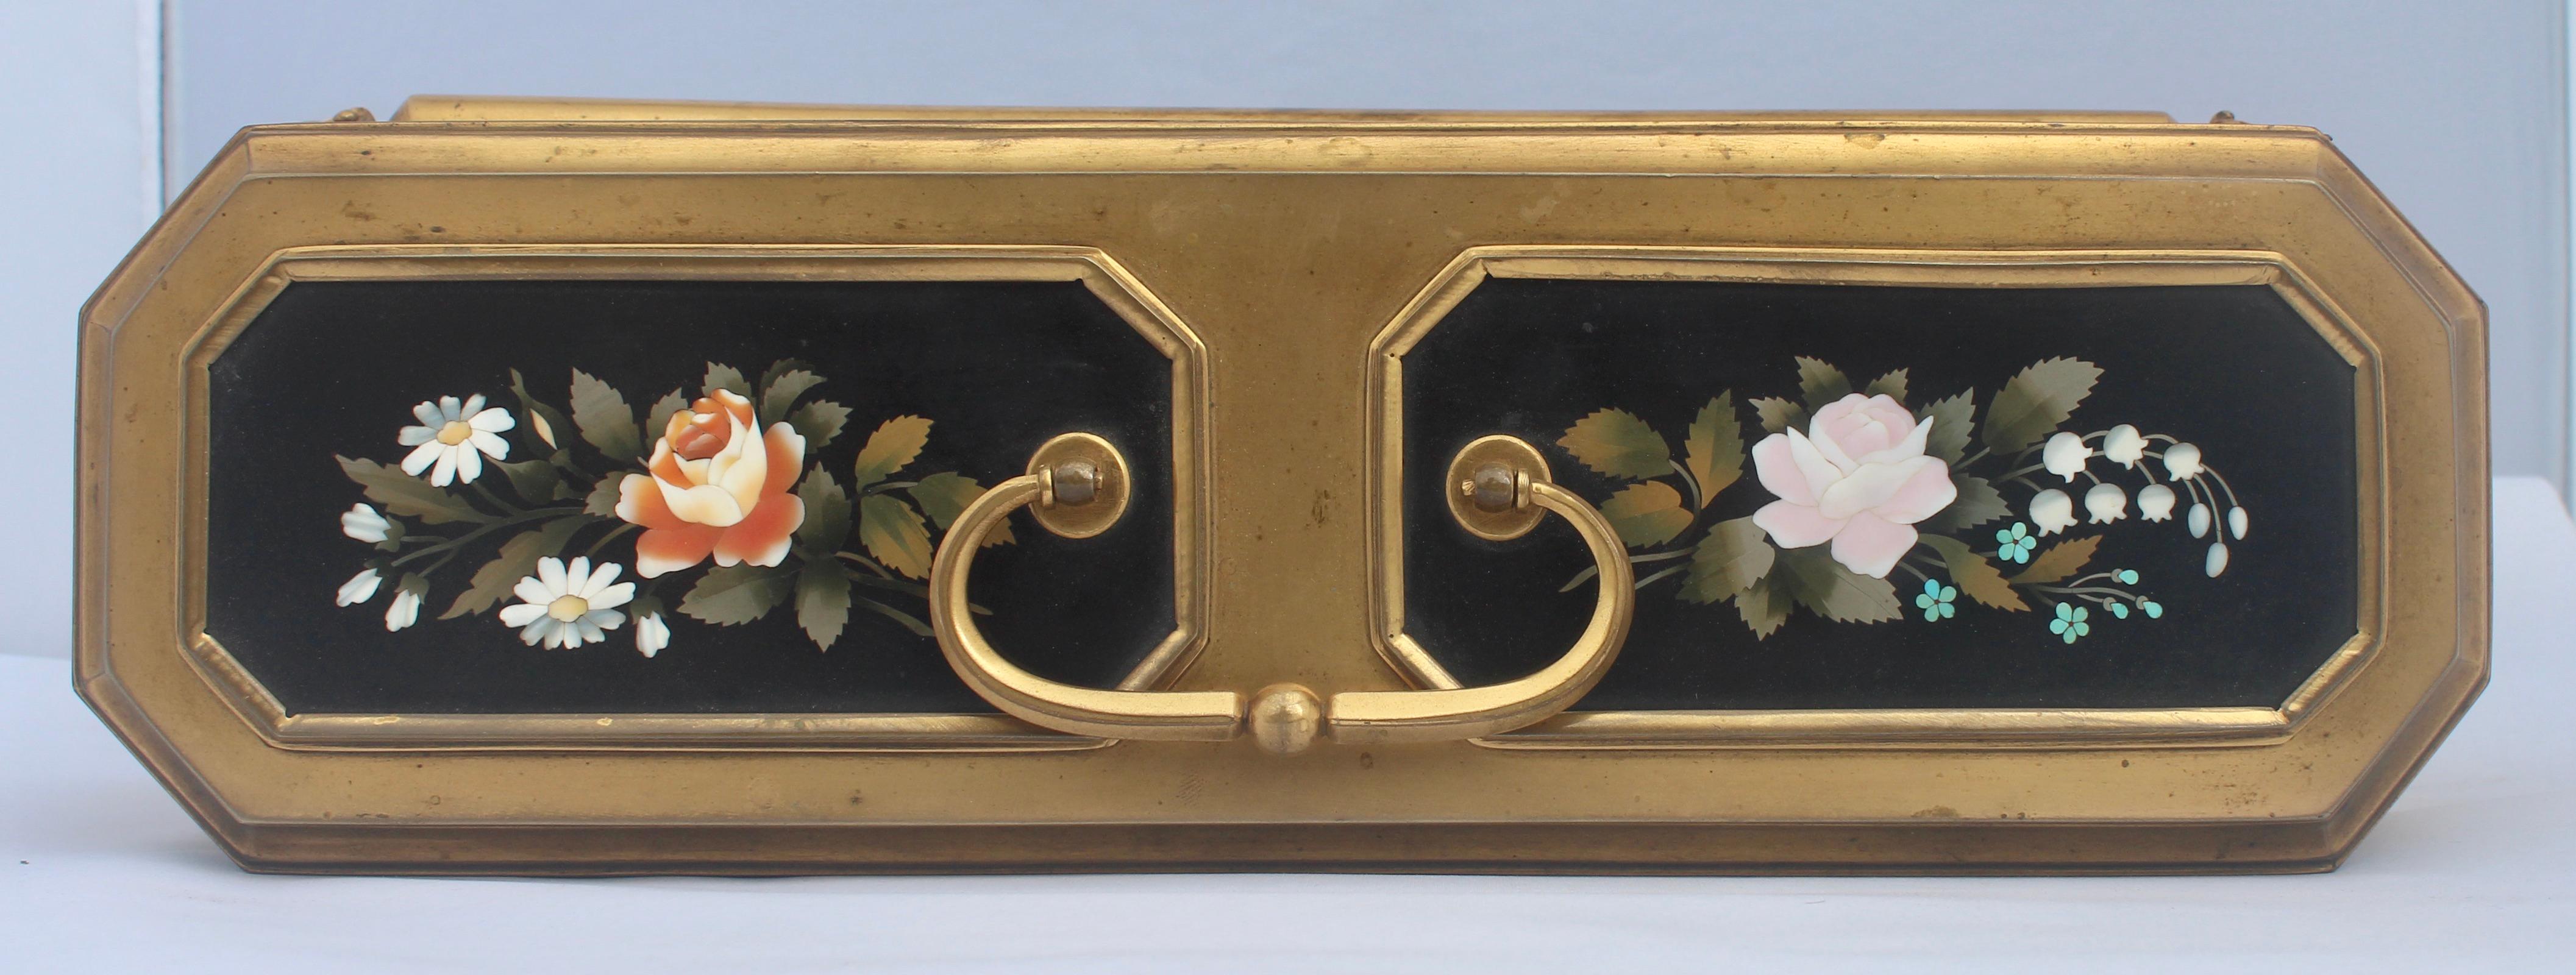 French 19th Century Gilt-Bronze and Pietra Dura Inset Jewelry Casket 2